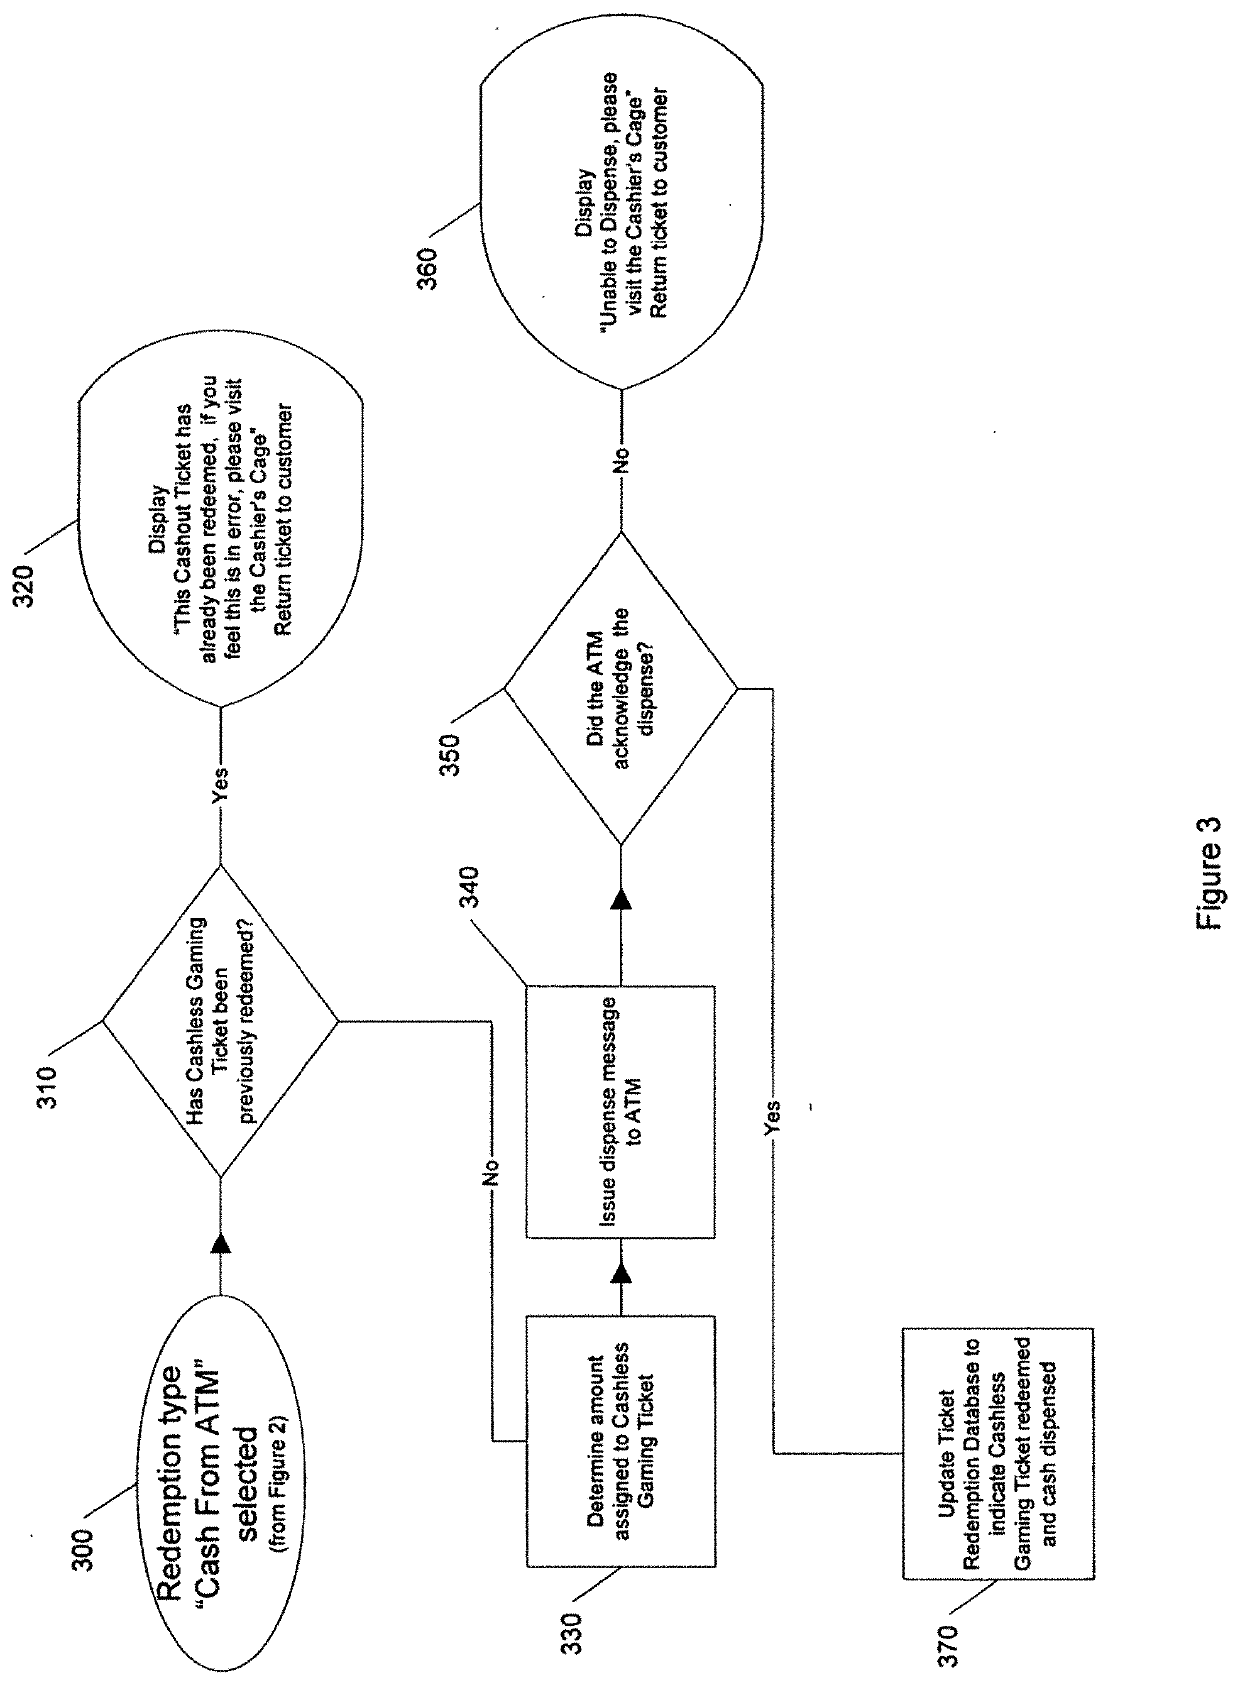 System and method for redeeming cashless gaming tickets to bank accounts via multi-function ATM